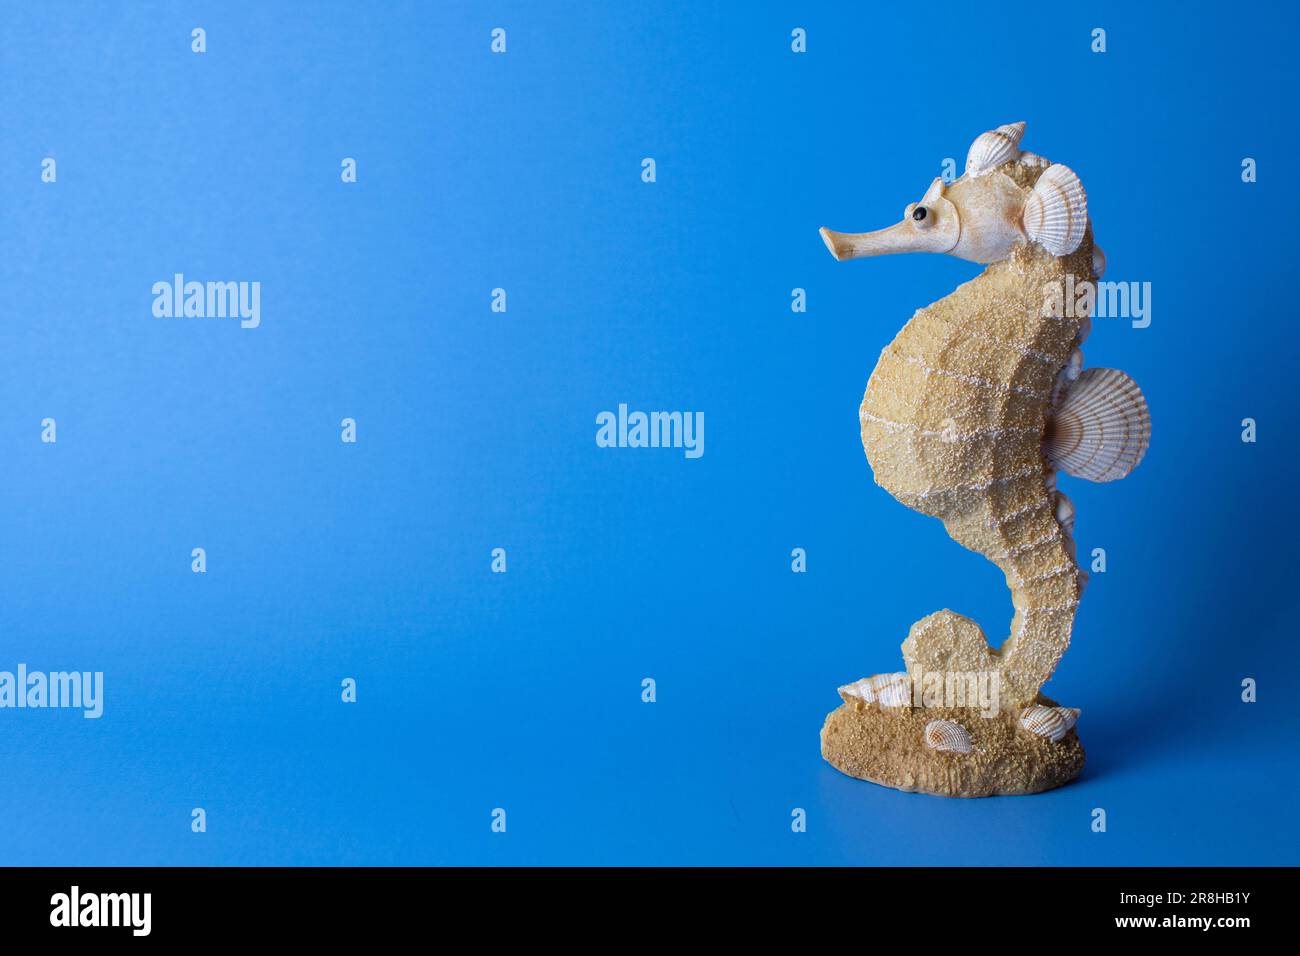 Golden rabbit figurine on the blue background. Free space Stock Photo